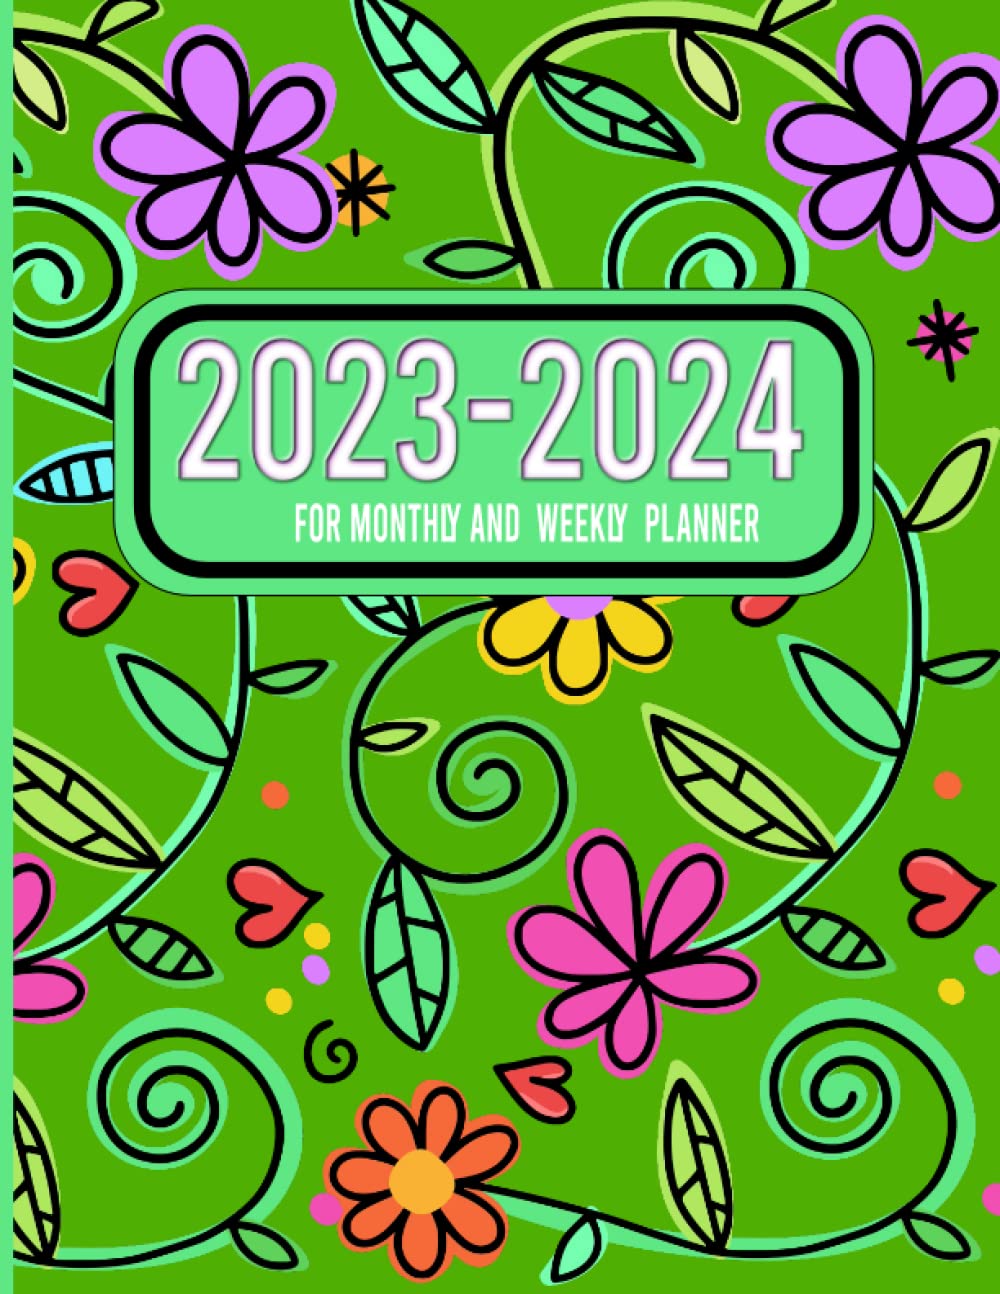 2023-2024 Monthly and Weekly Planner: 18 Months (July 2023 through December 2024) with Holidays, Organize Agenda Schedule Yearly, Contact Information, Passwords Log and Birthday Tracking